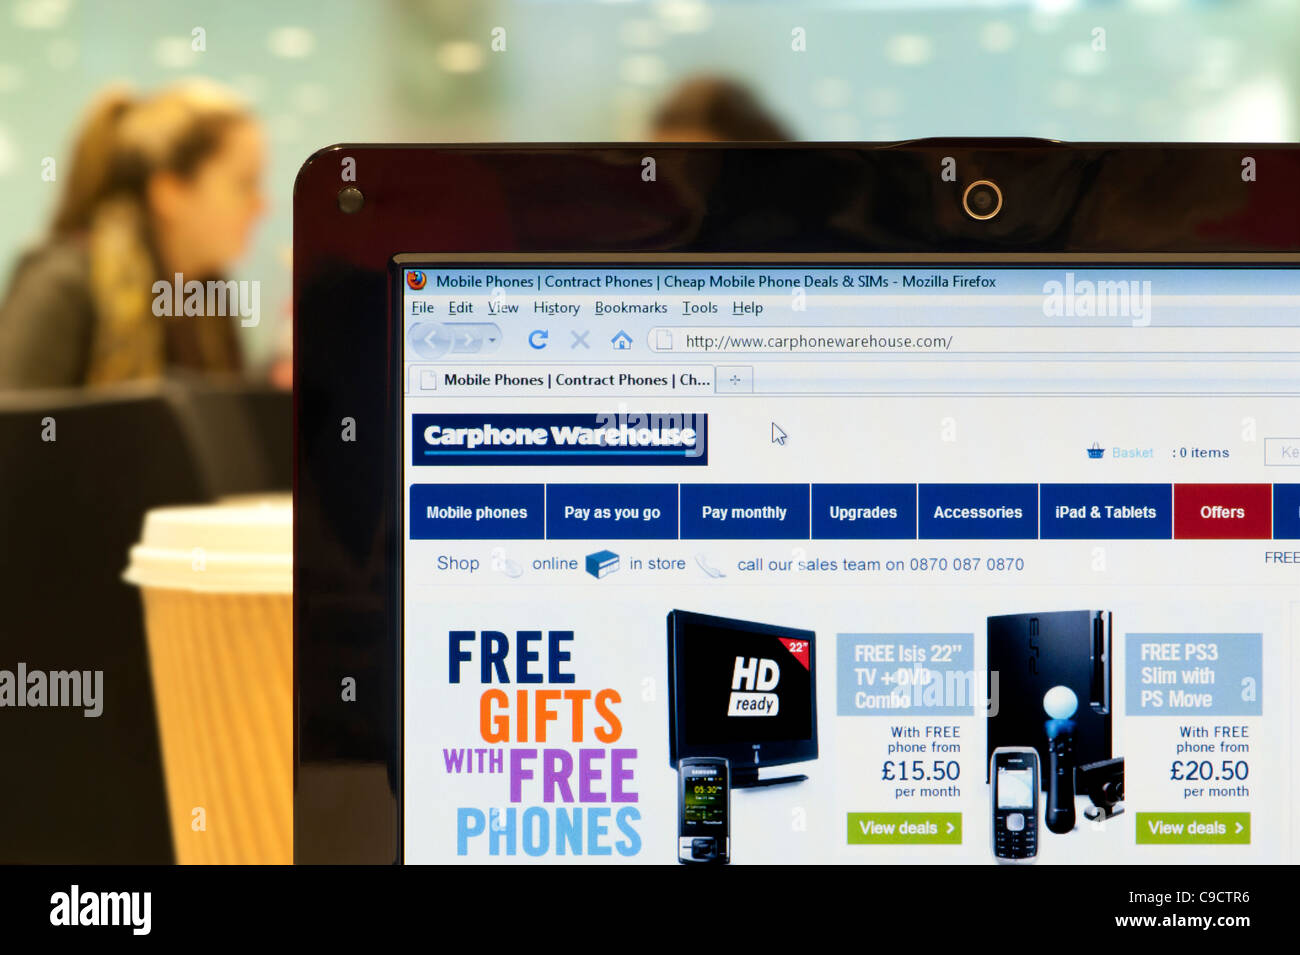 The Carphone Warehouse website shot in a coffee shop environment (Editorial use only: print, TV, e-book and editorial website). Stock Photo